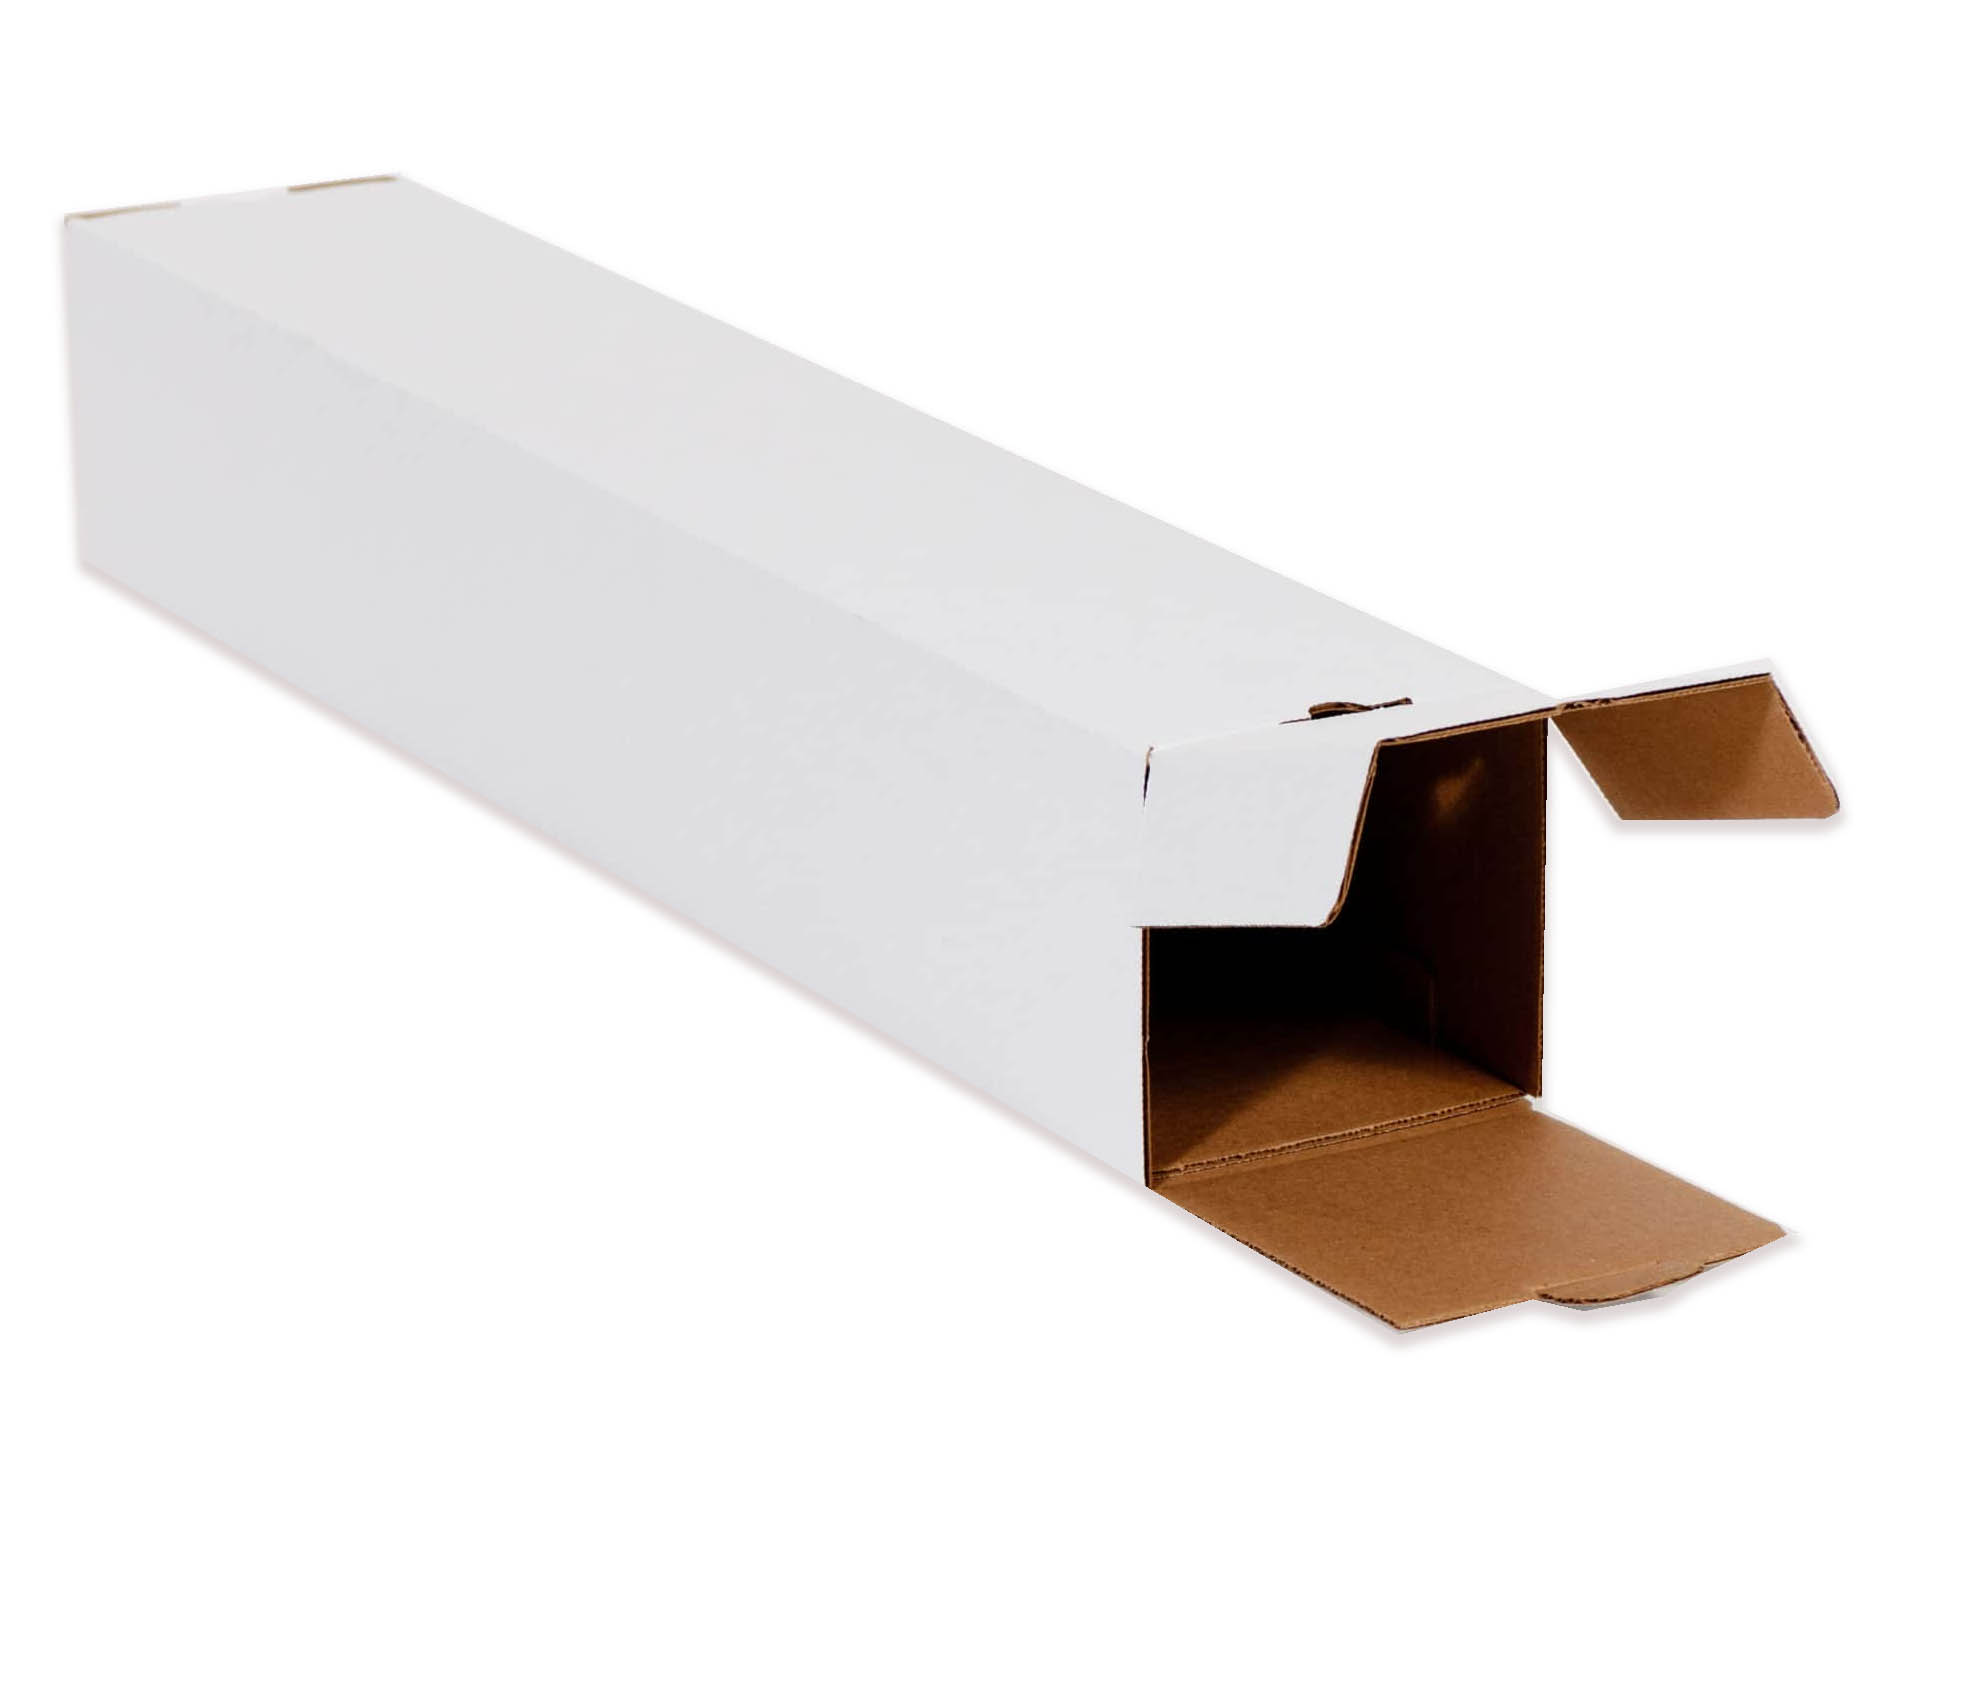 200#/ECT-32-B 3 x 3 x 37 Box Packaging White Square Mailing Tube Case of 25